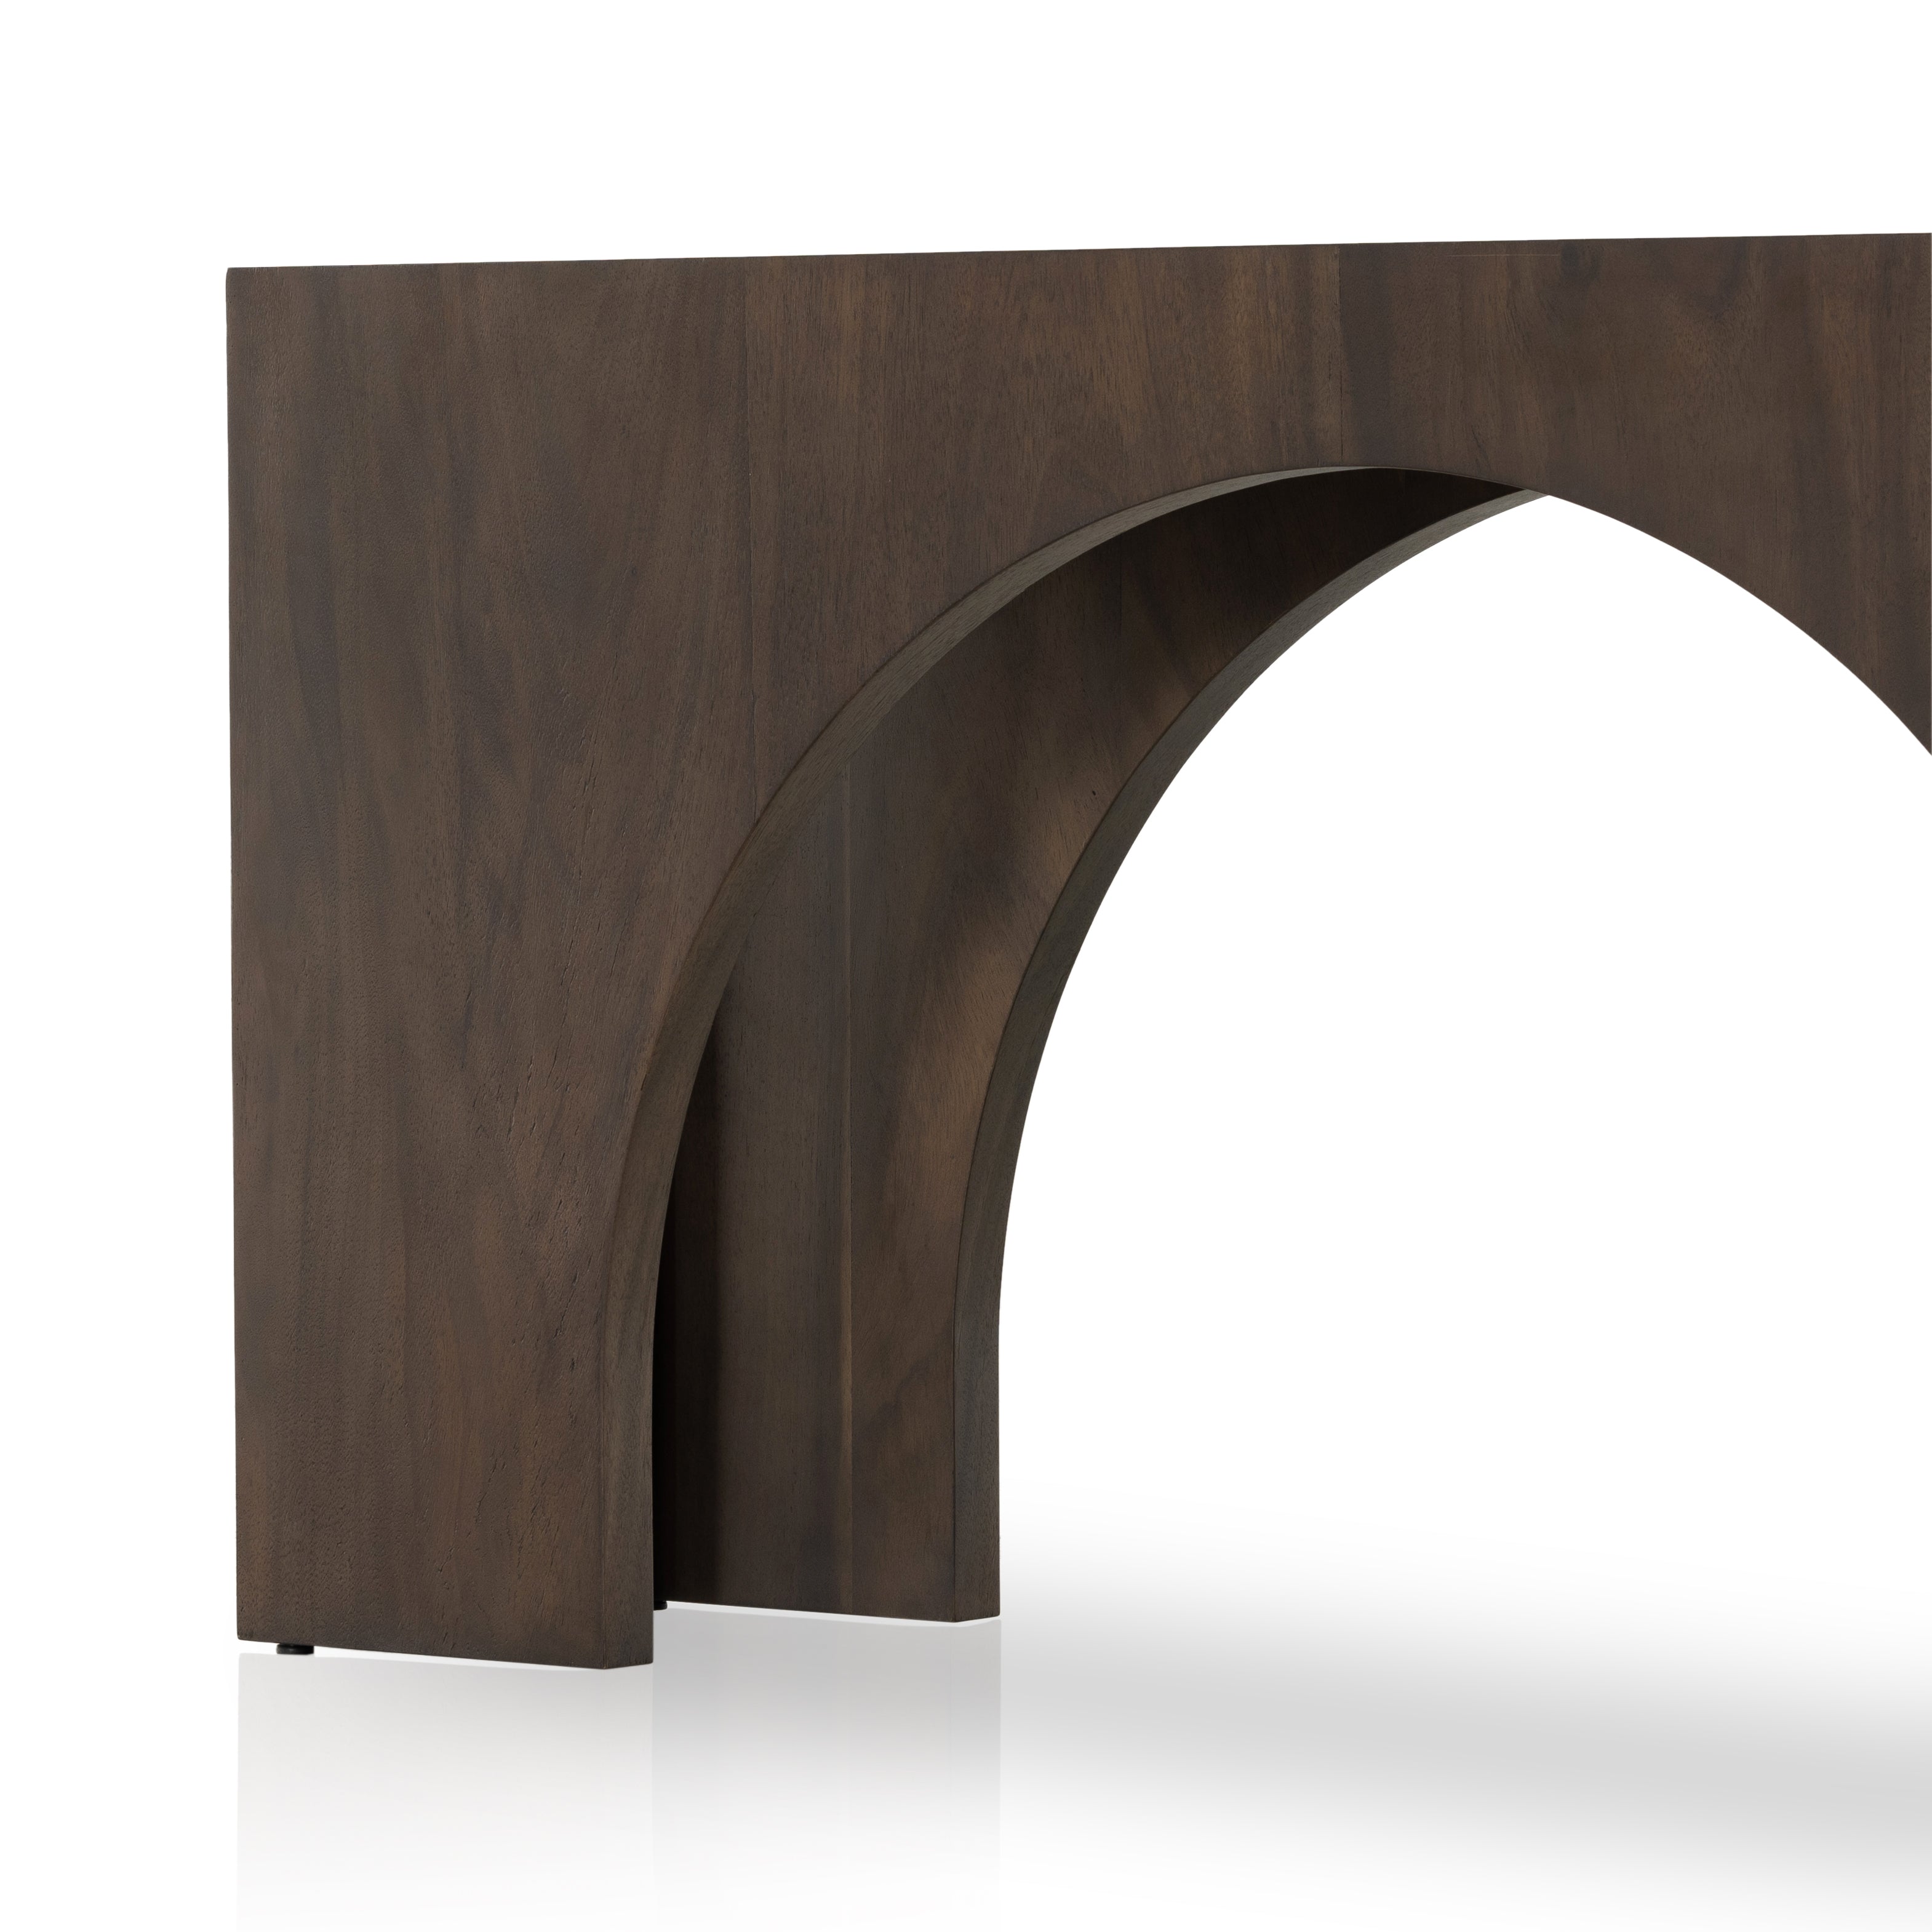 Clean and simple, with great impact. Made from smoked Guanacaste, shapely arches and block corners speak to the architectural inspiration behind this eye-catching console table. Amethyst Home provides interior design, new construction, custom furniture, and area rugs in the Miami metro area.